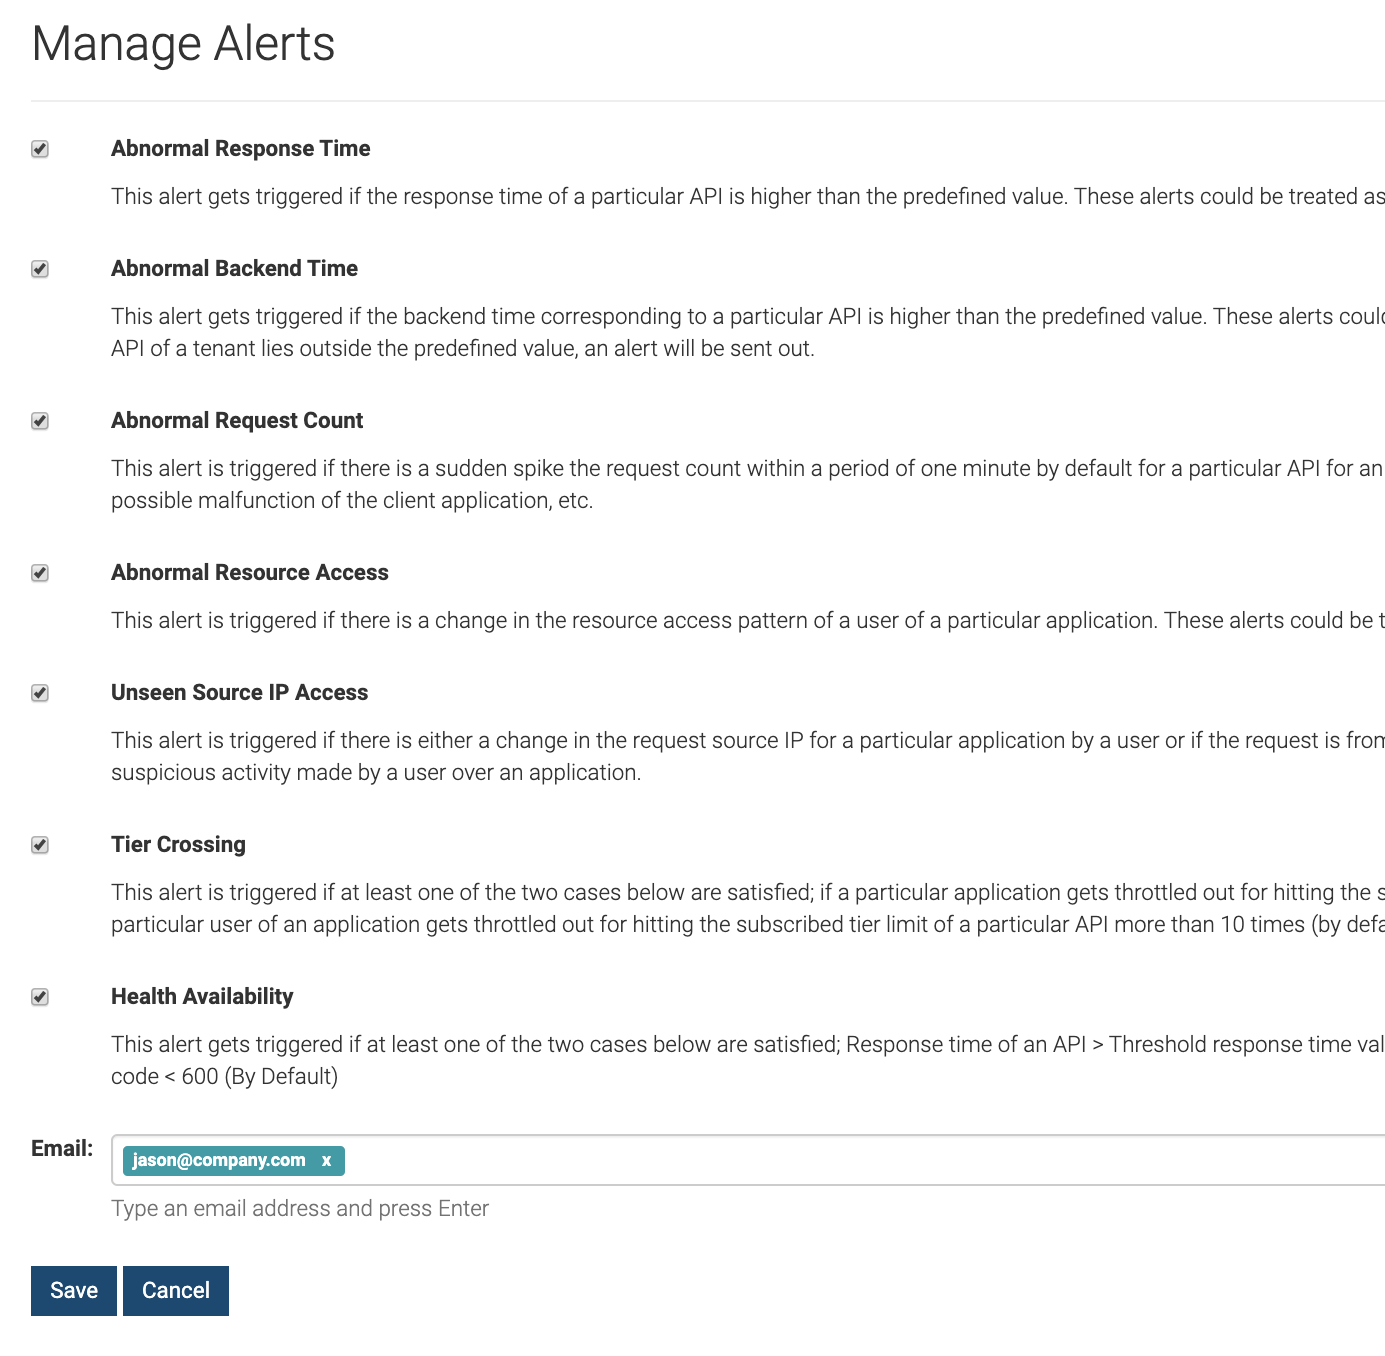 Subscribe to alerts in admin portal